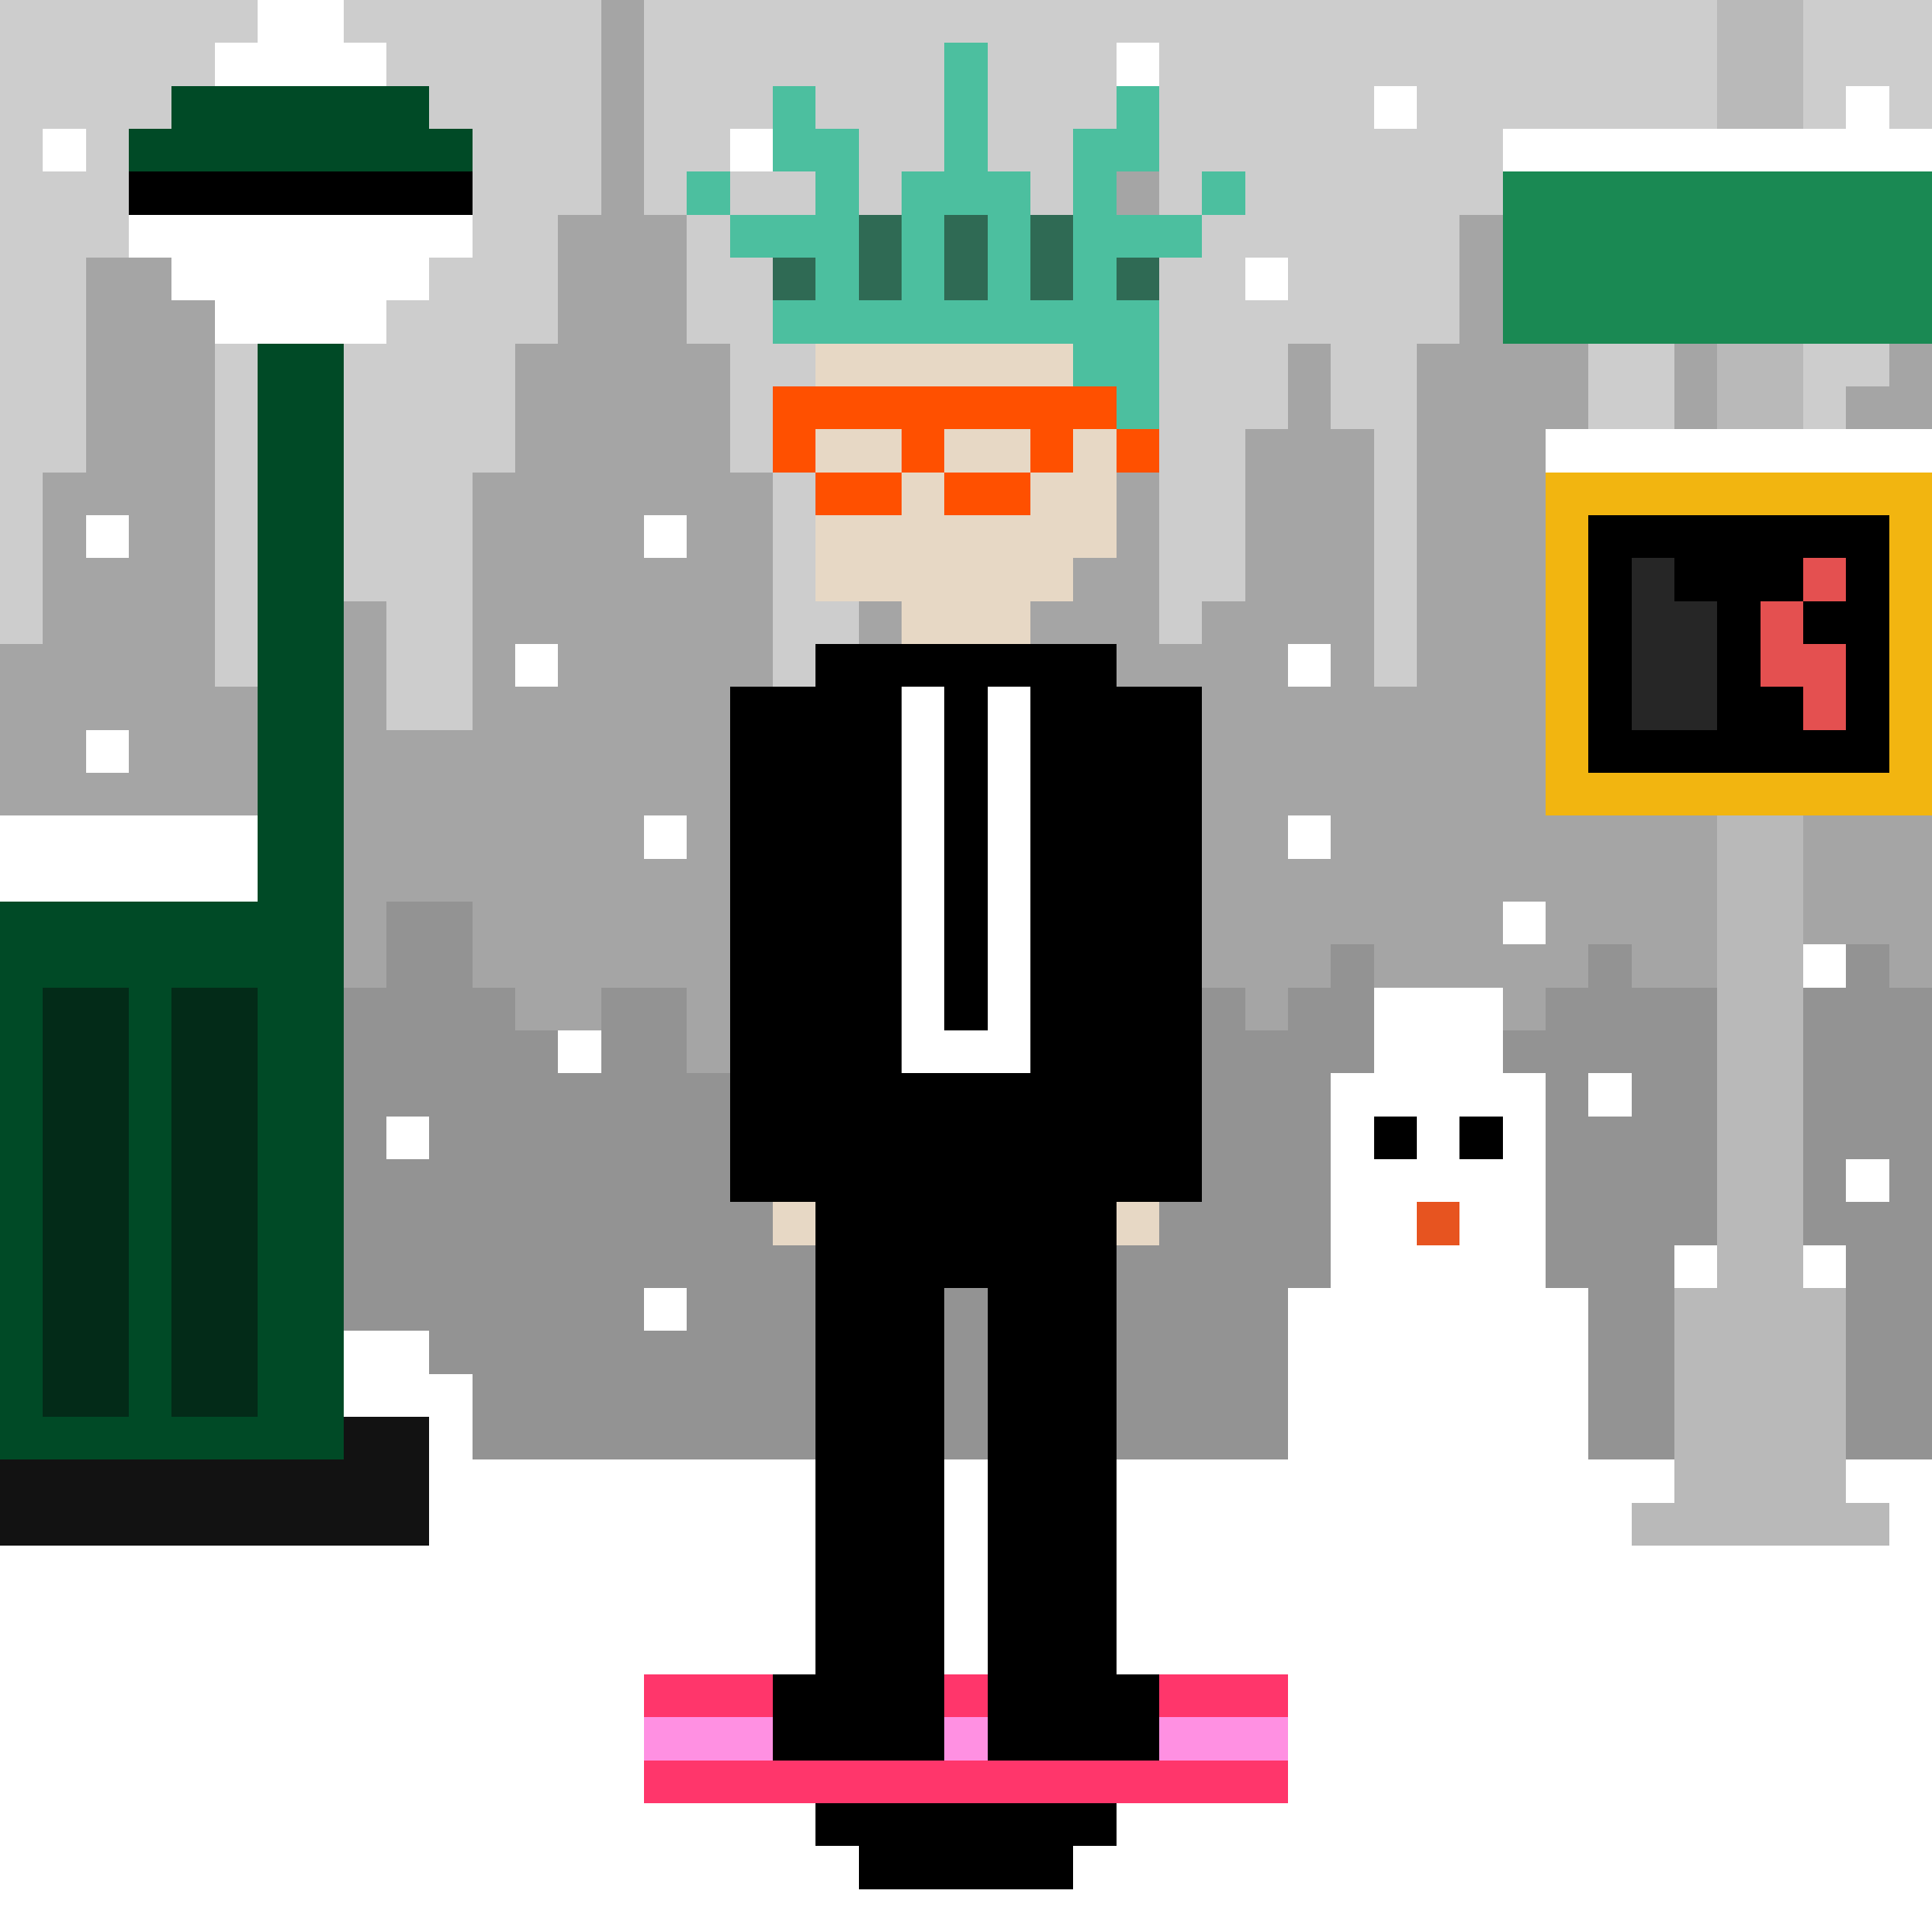 A pixel drawing of a person with spiky green hair and orange glasses in a black suit, standing on a snowy street by an entrance to the subway